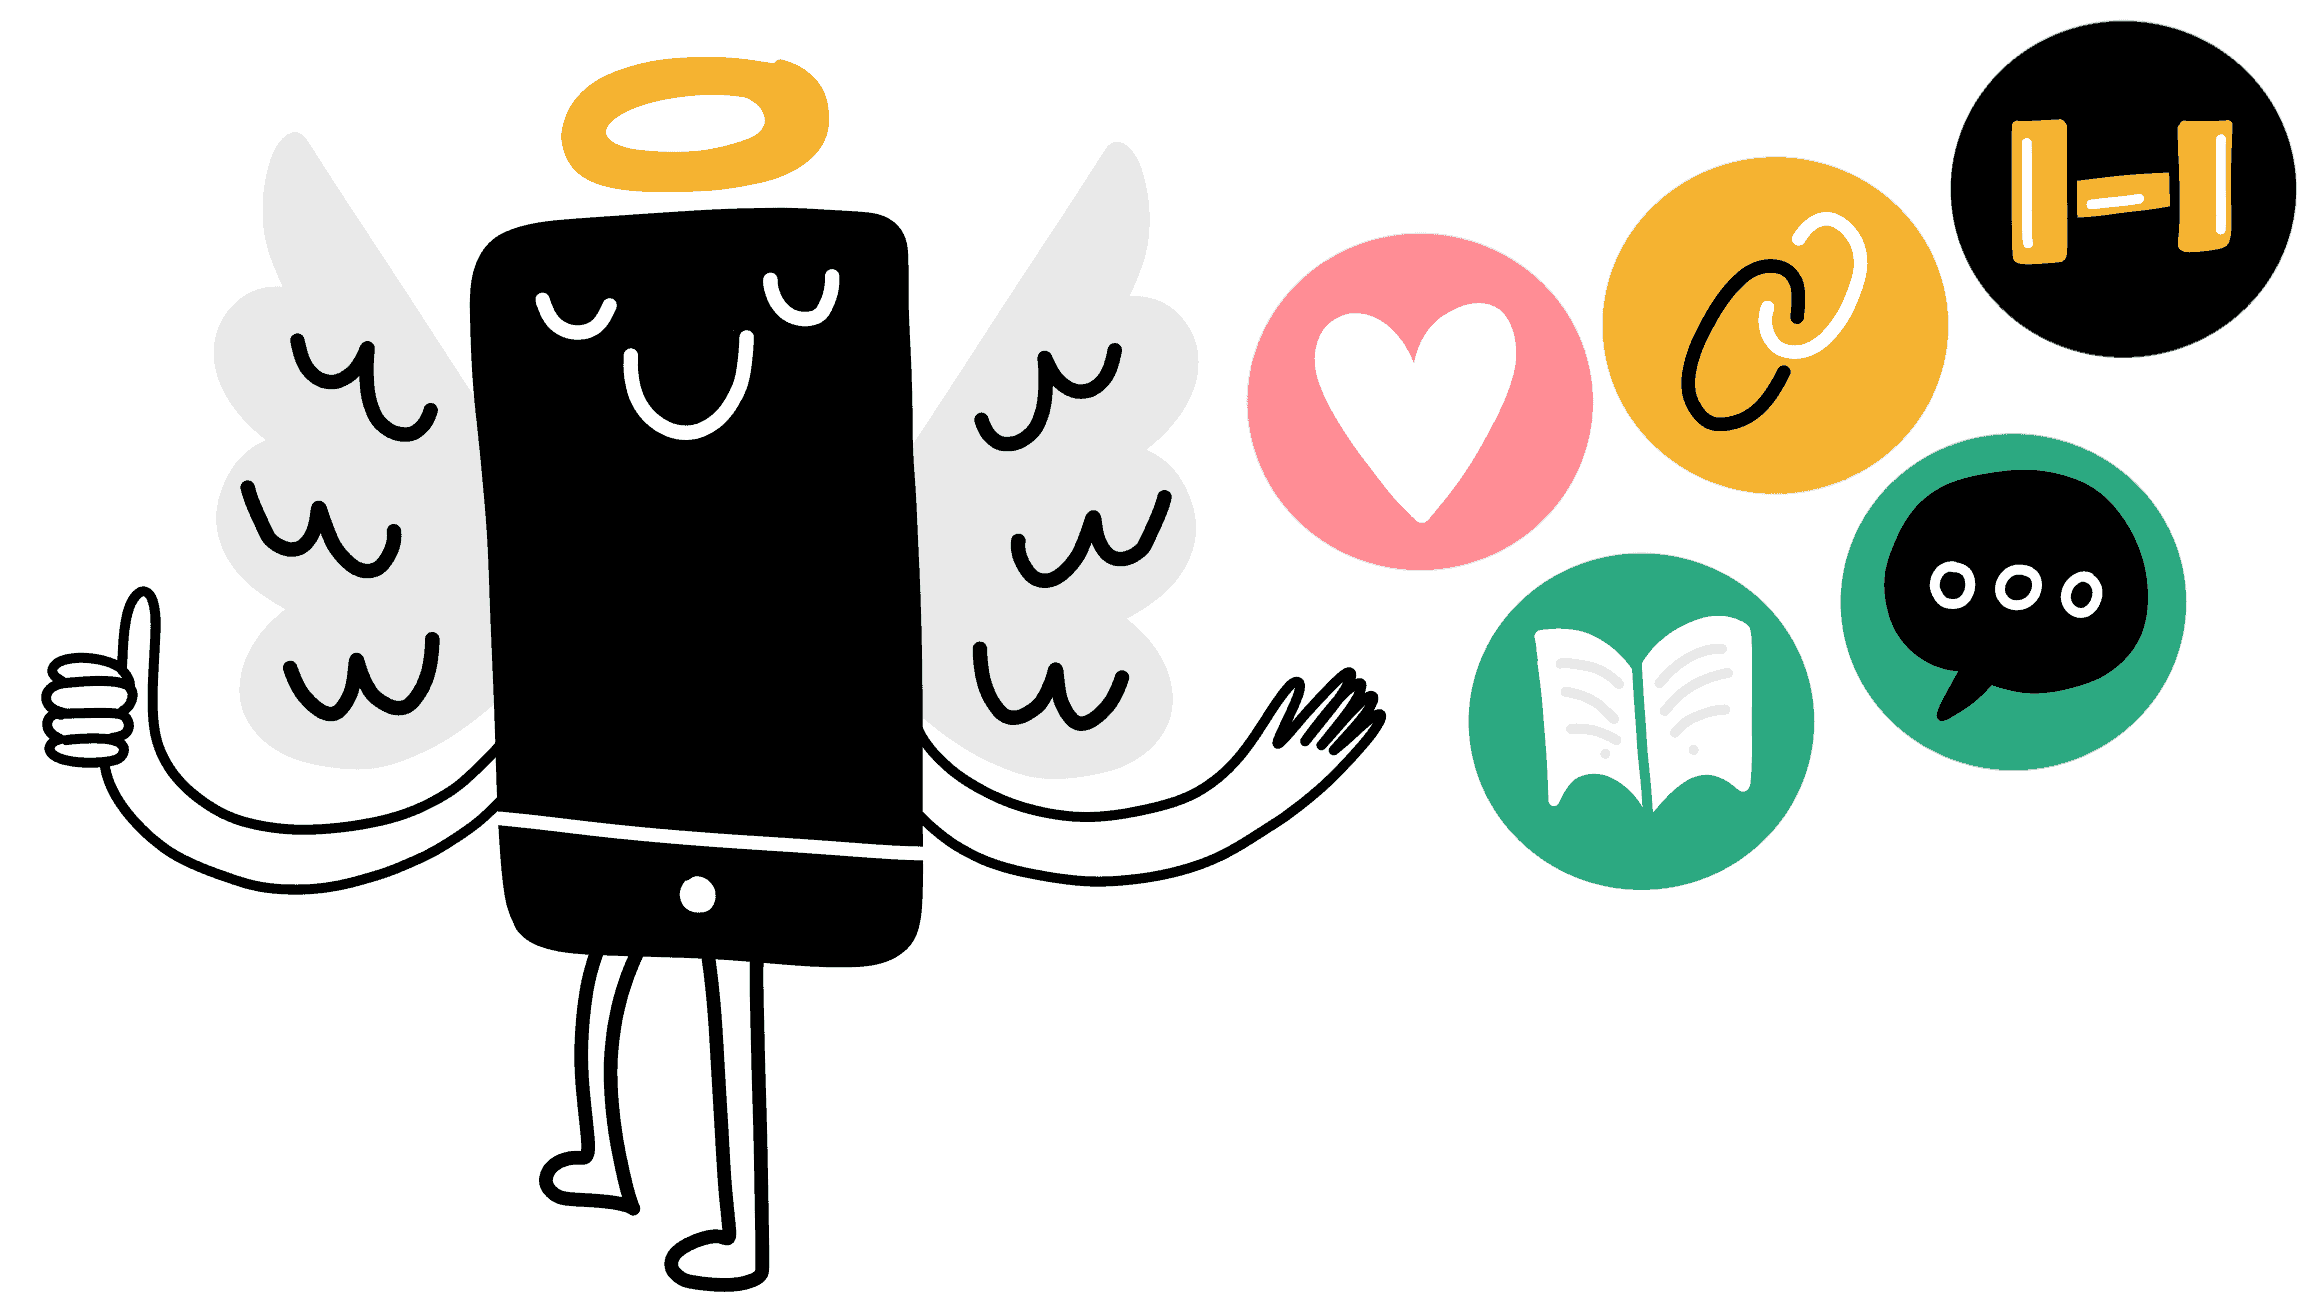 Illustration of a cartoon angle smartphone emanating small icons representing the benefits of technology apps: dating, maintaining friendships, reading, exercising, and socializing.